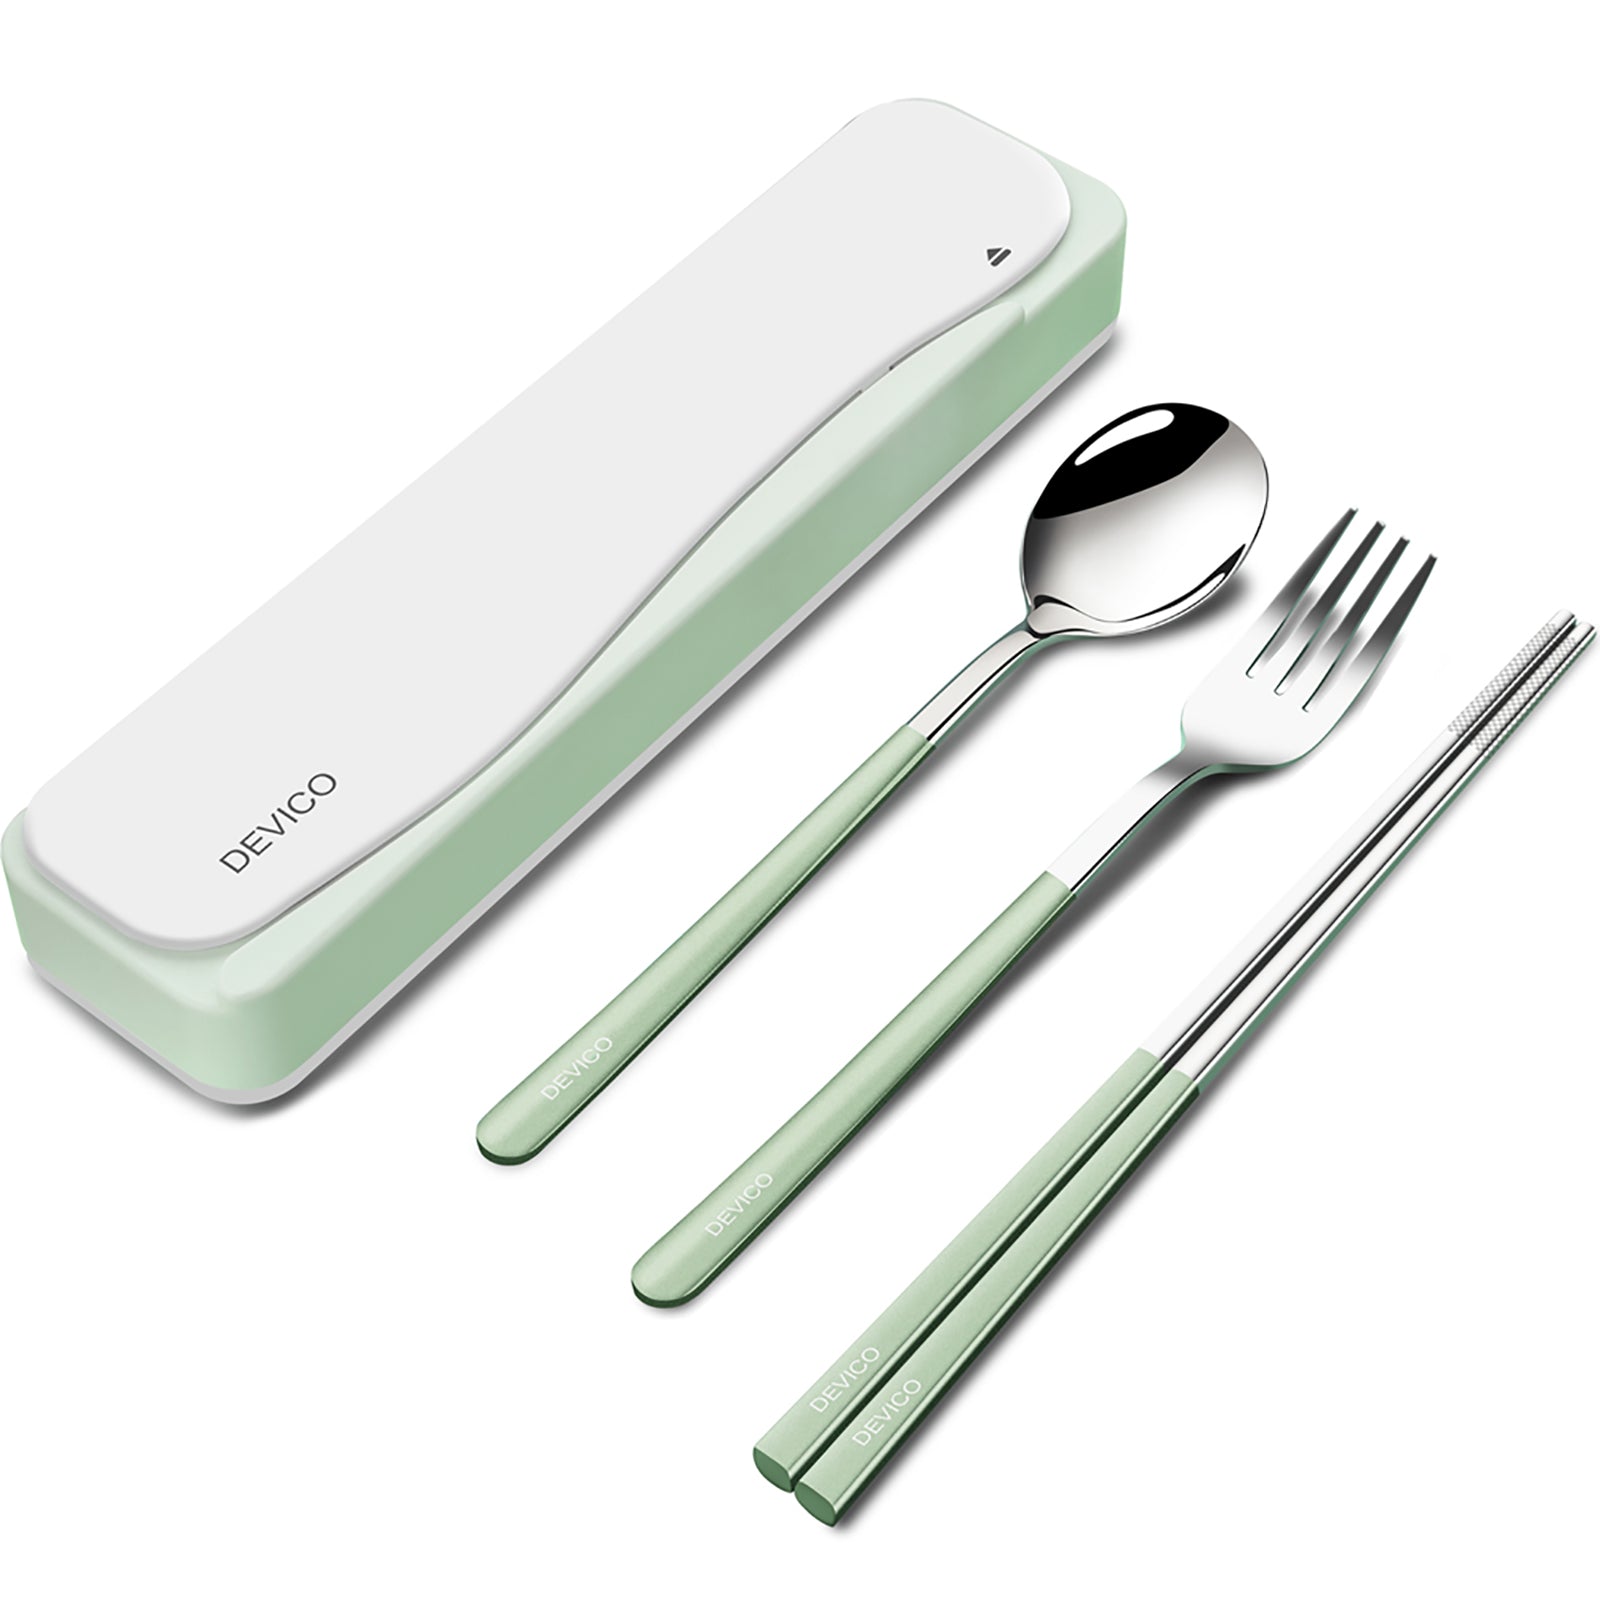 Stainless　Steel　Travel　18/8　Utensils,　DEVICO　Cutlery　DEVICO　Portable　4pcs　–　Set　STORE